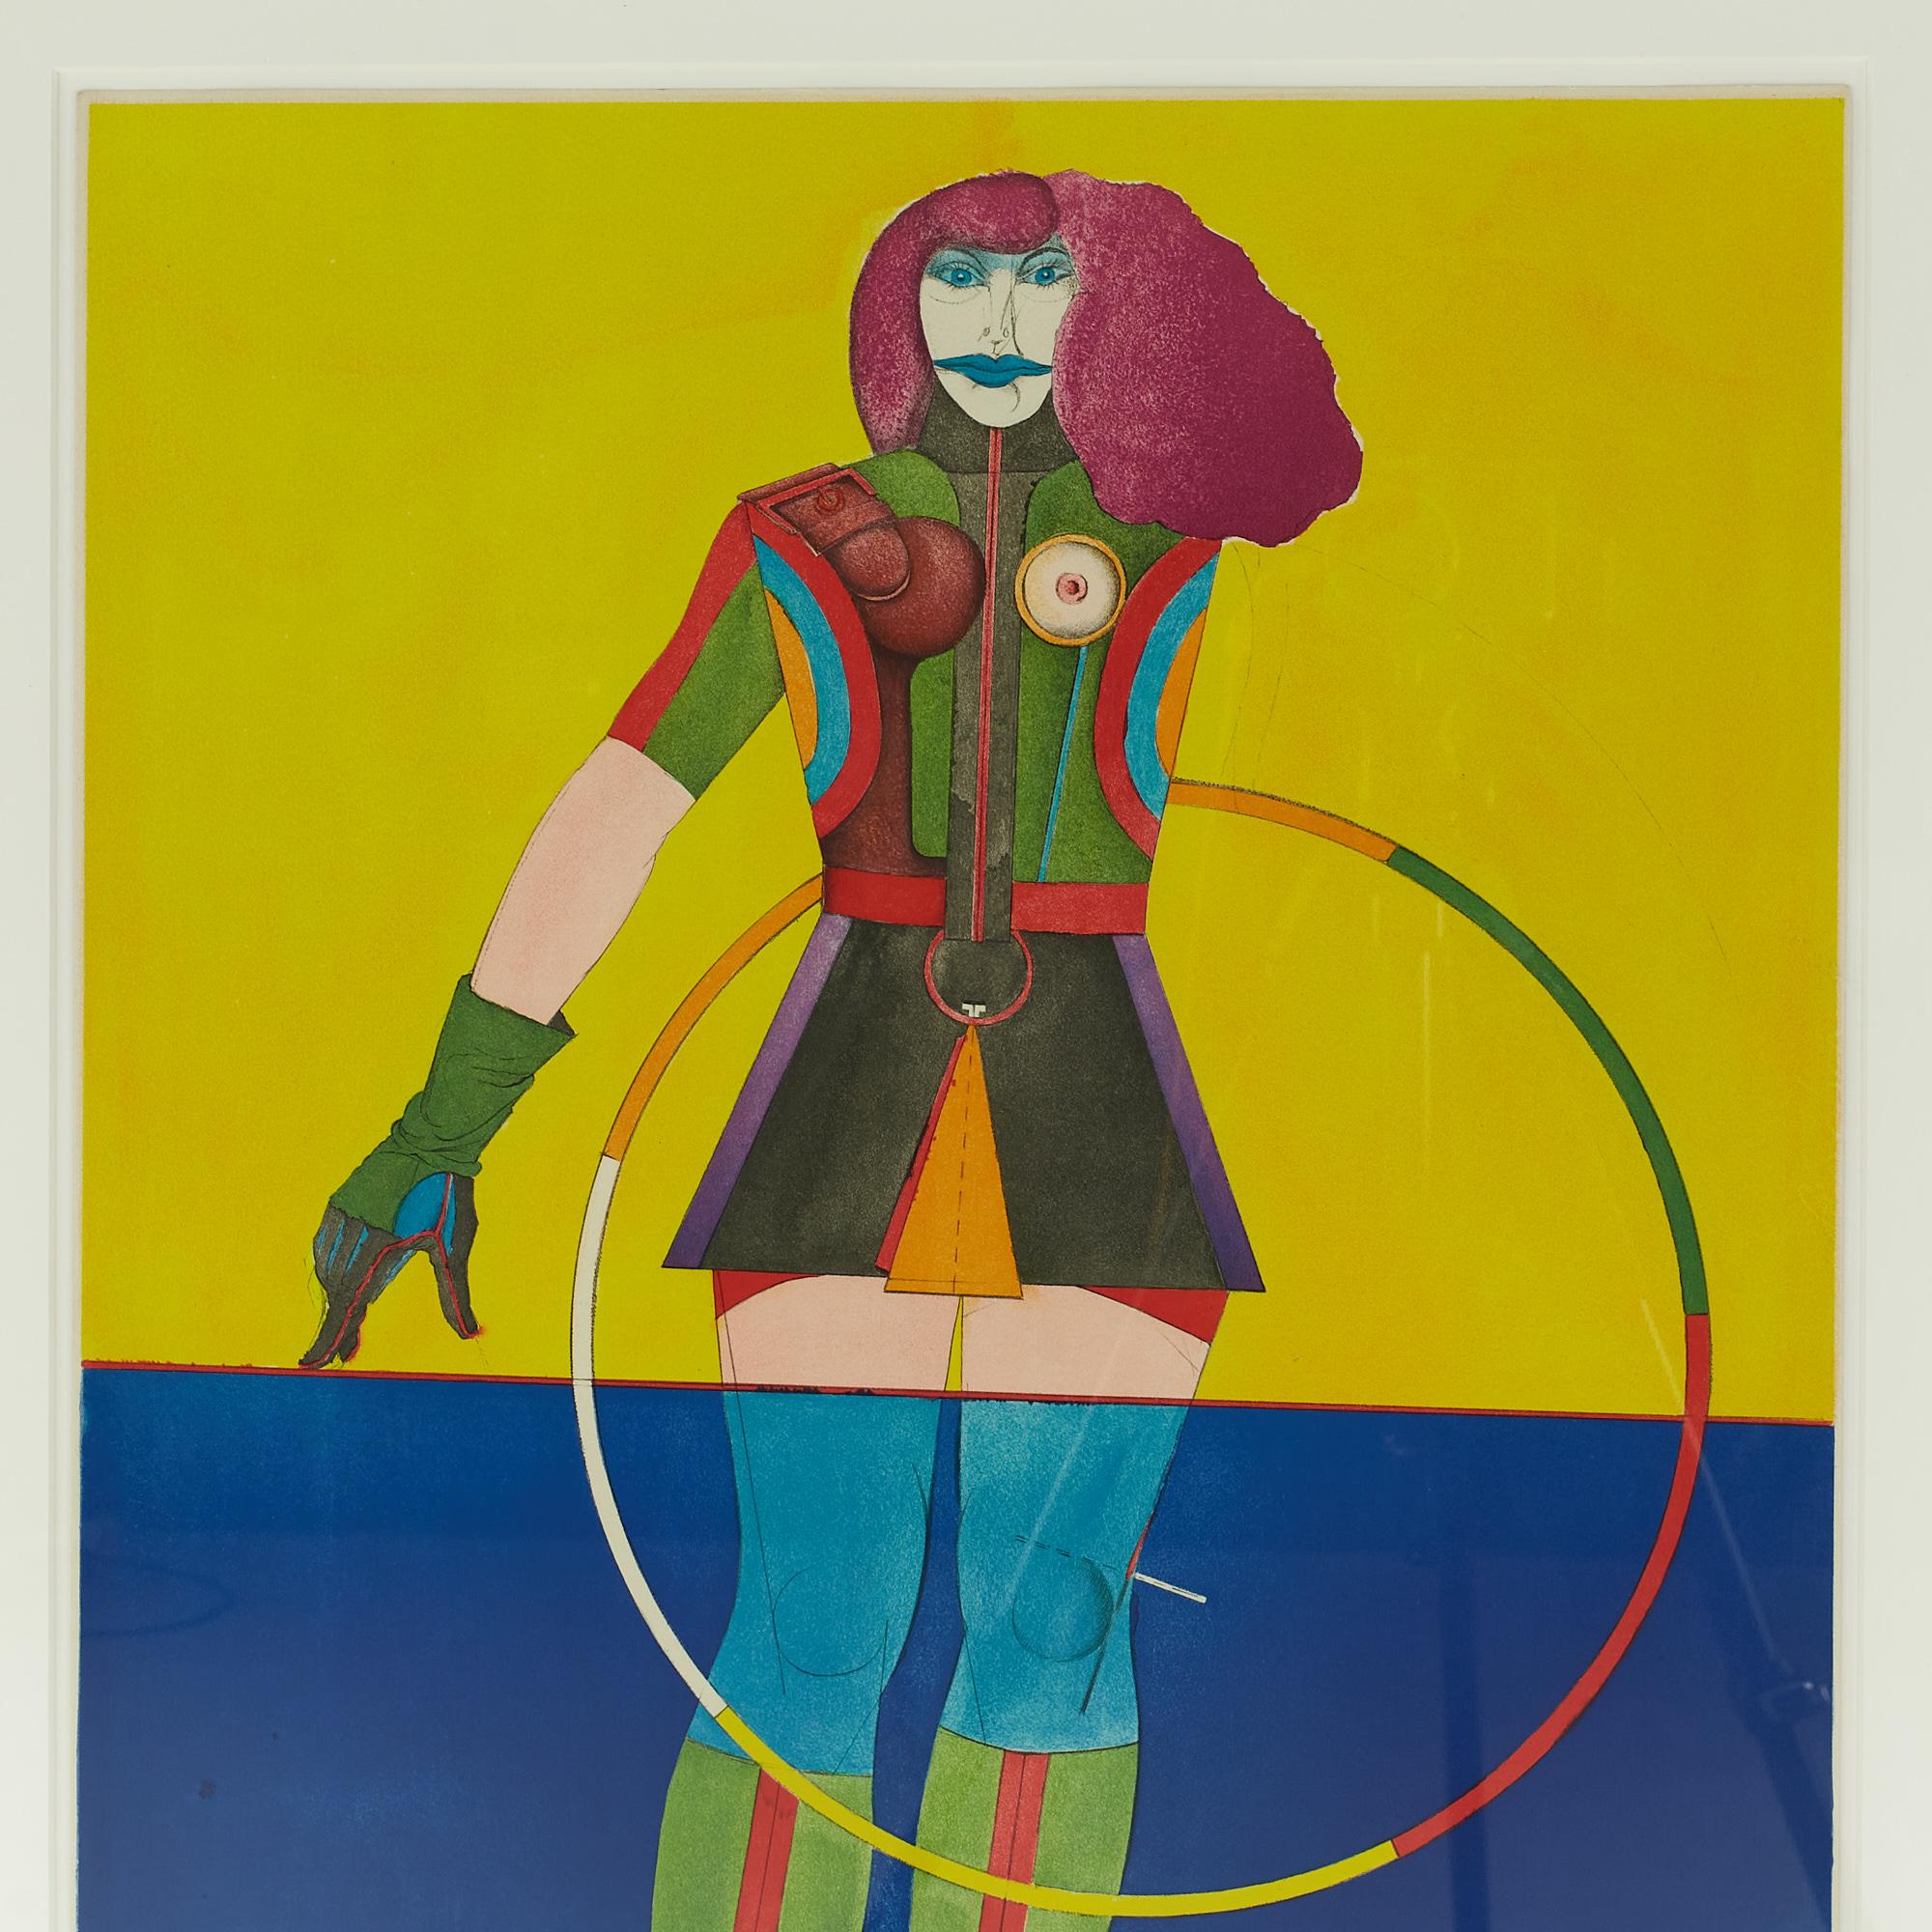 Richard Lindner Mid Century Signed Girl with Hoop Lithograph

This lithograph measures: 27.5 wide x 1 deep x 34.25 inches high

This piece is in Good Vintage Condition. Paper looks to be in great condition; frame has some minor chips to gold